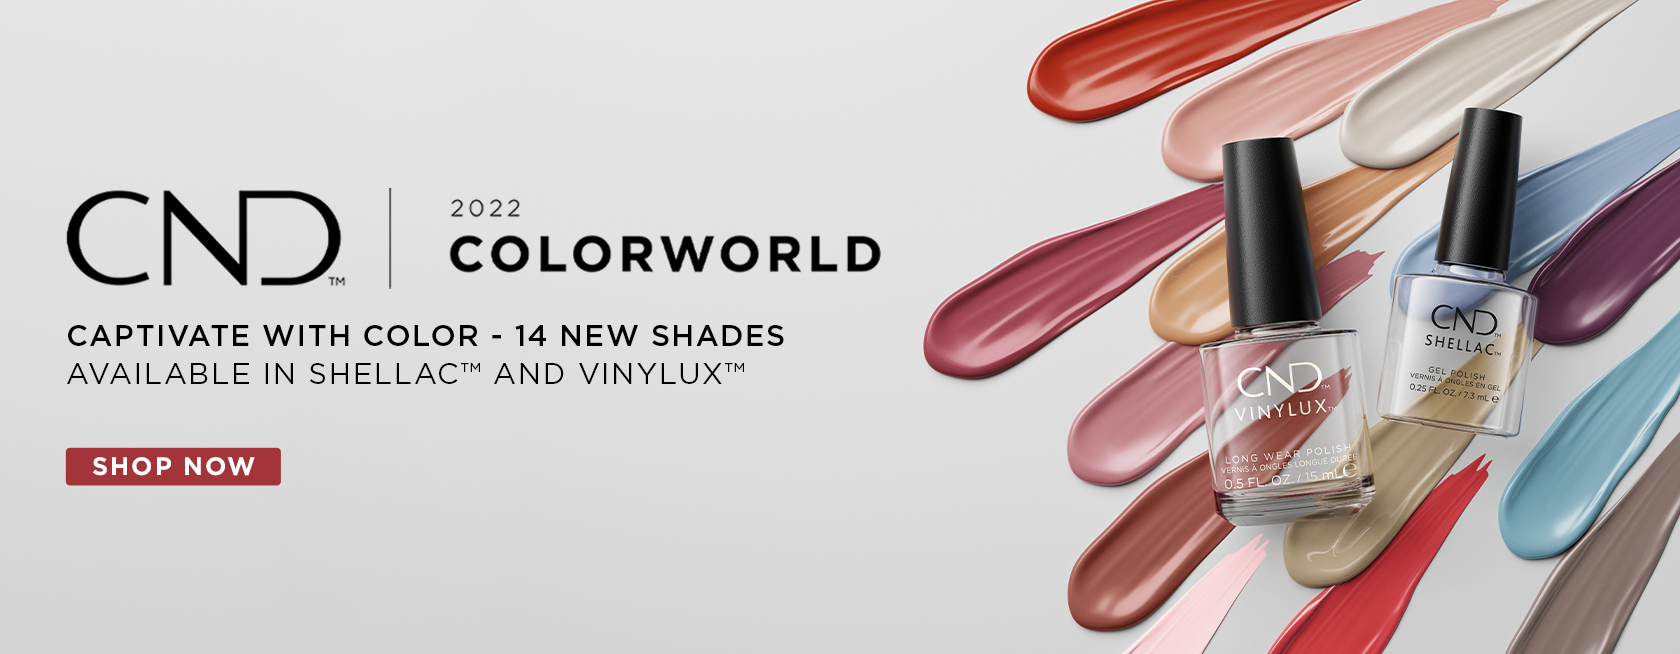 CND™ COLORWORLD Collection